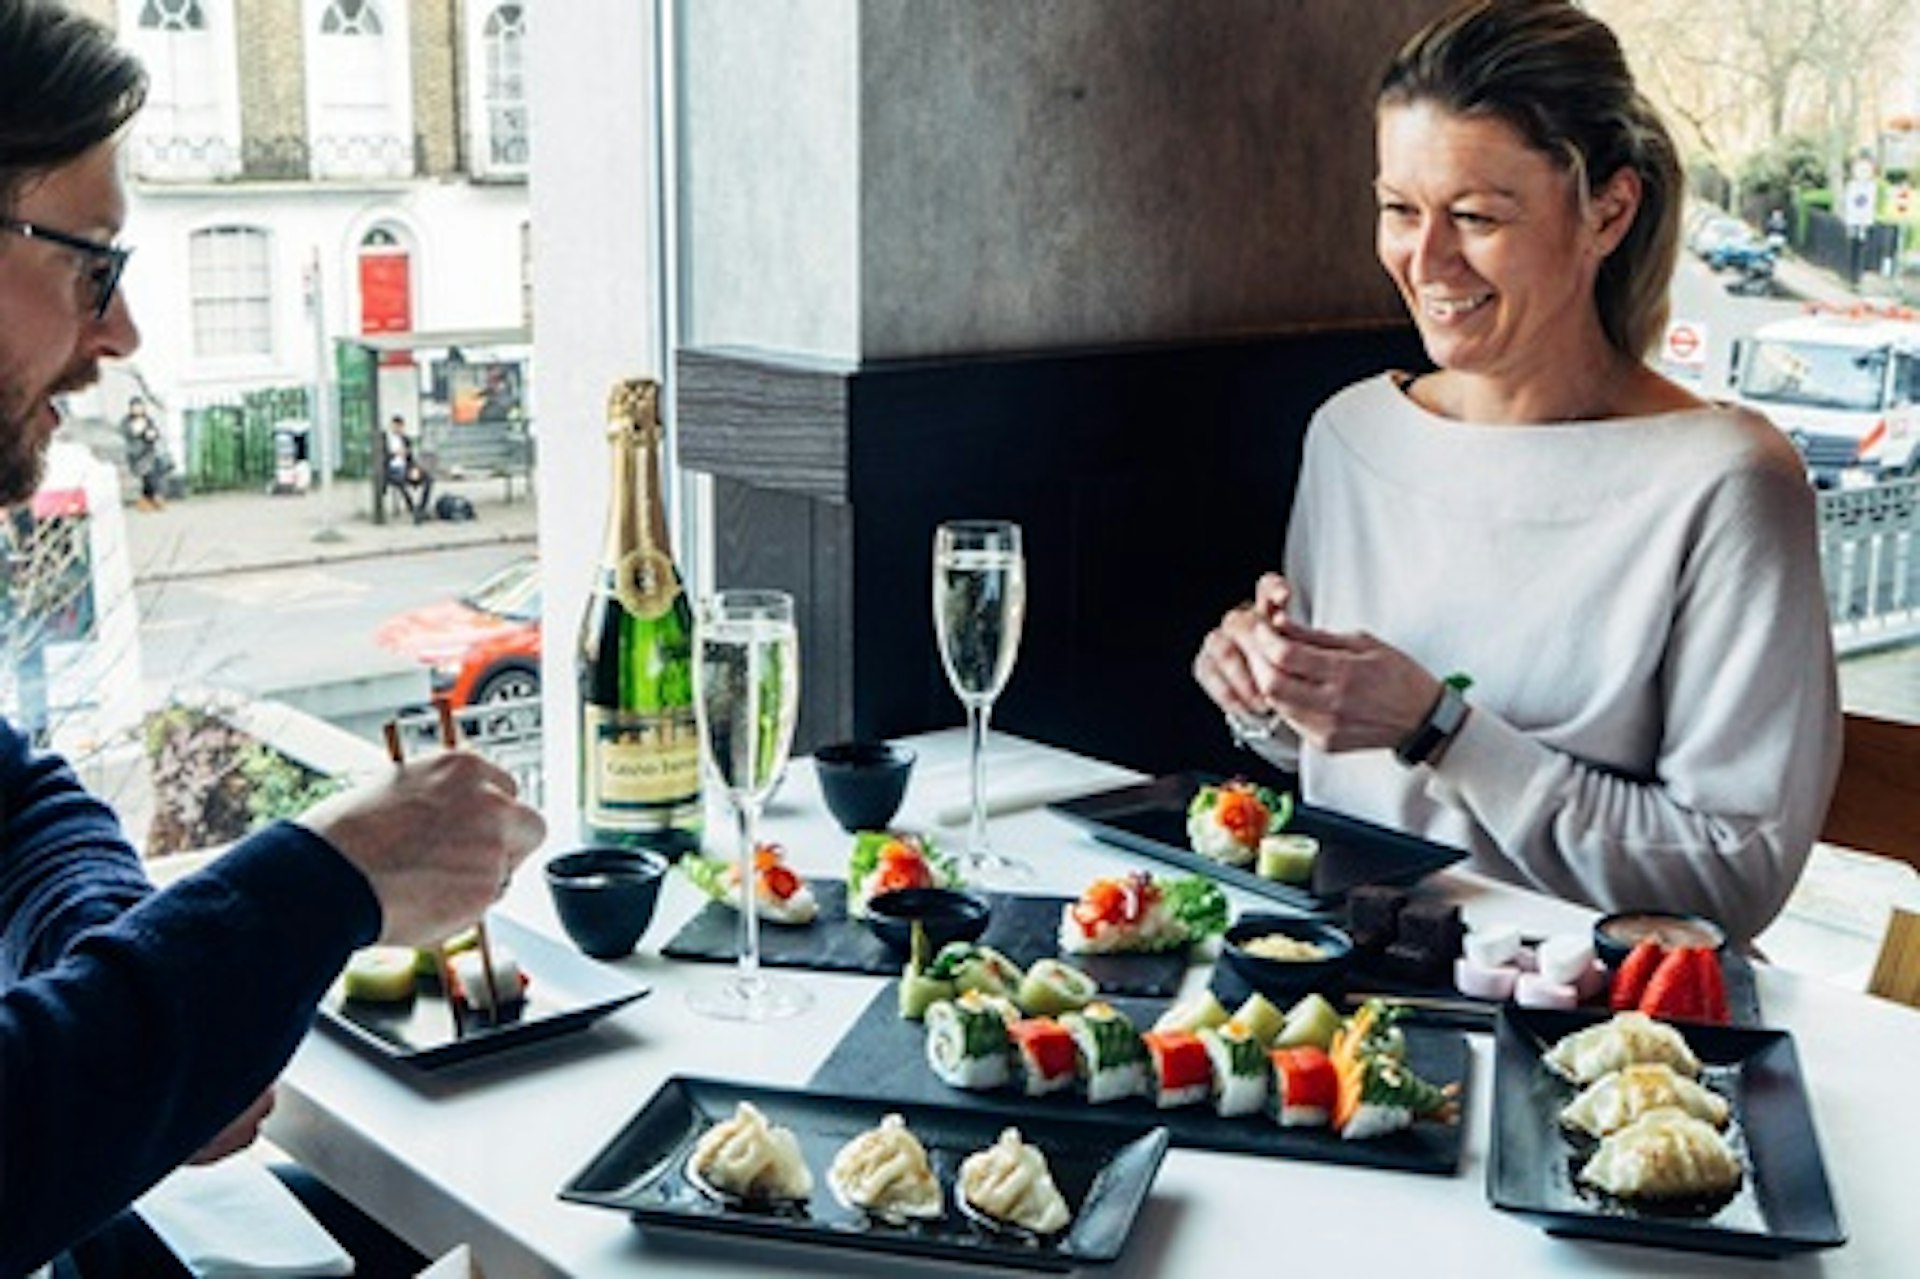 Create Your Own Sushi Dragon with Free Flowing Brunch for Two at inamo, London 2